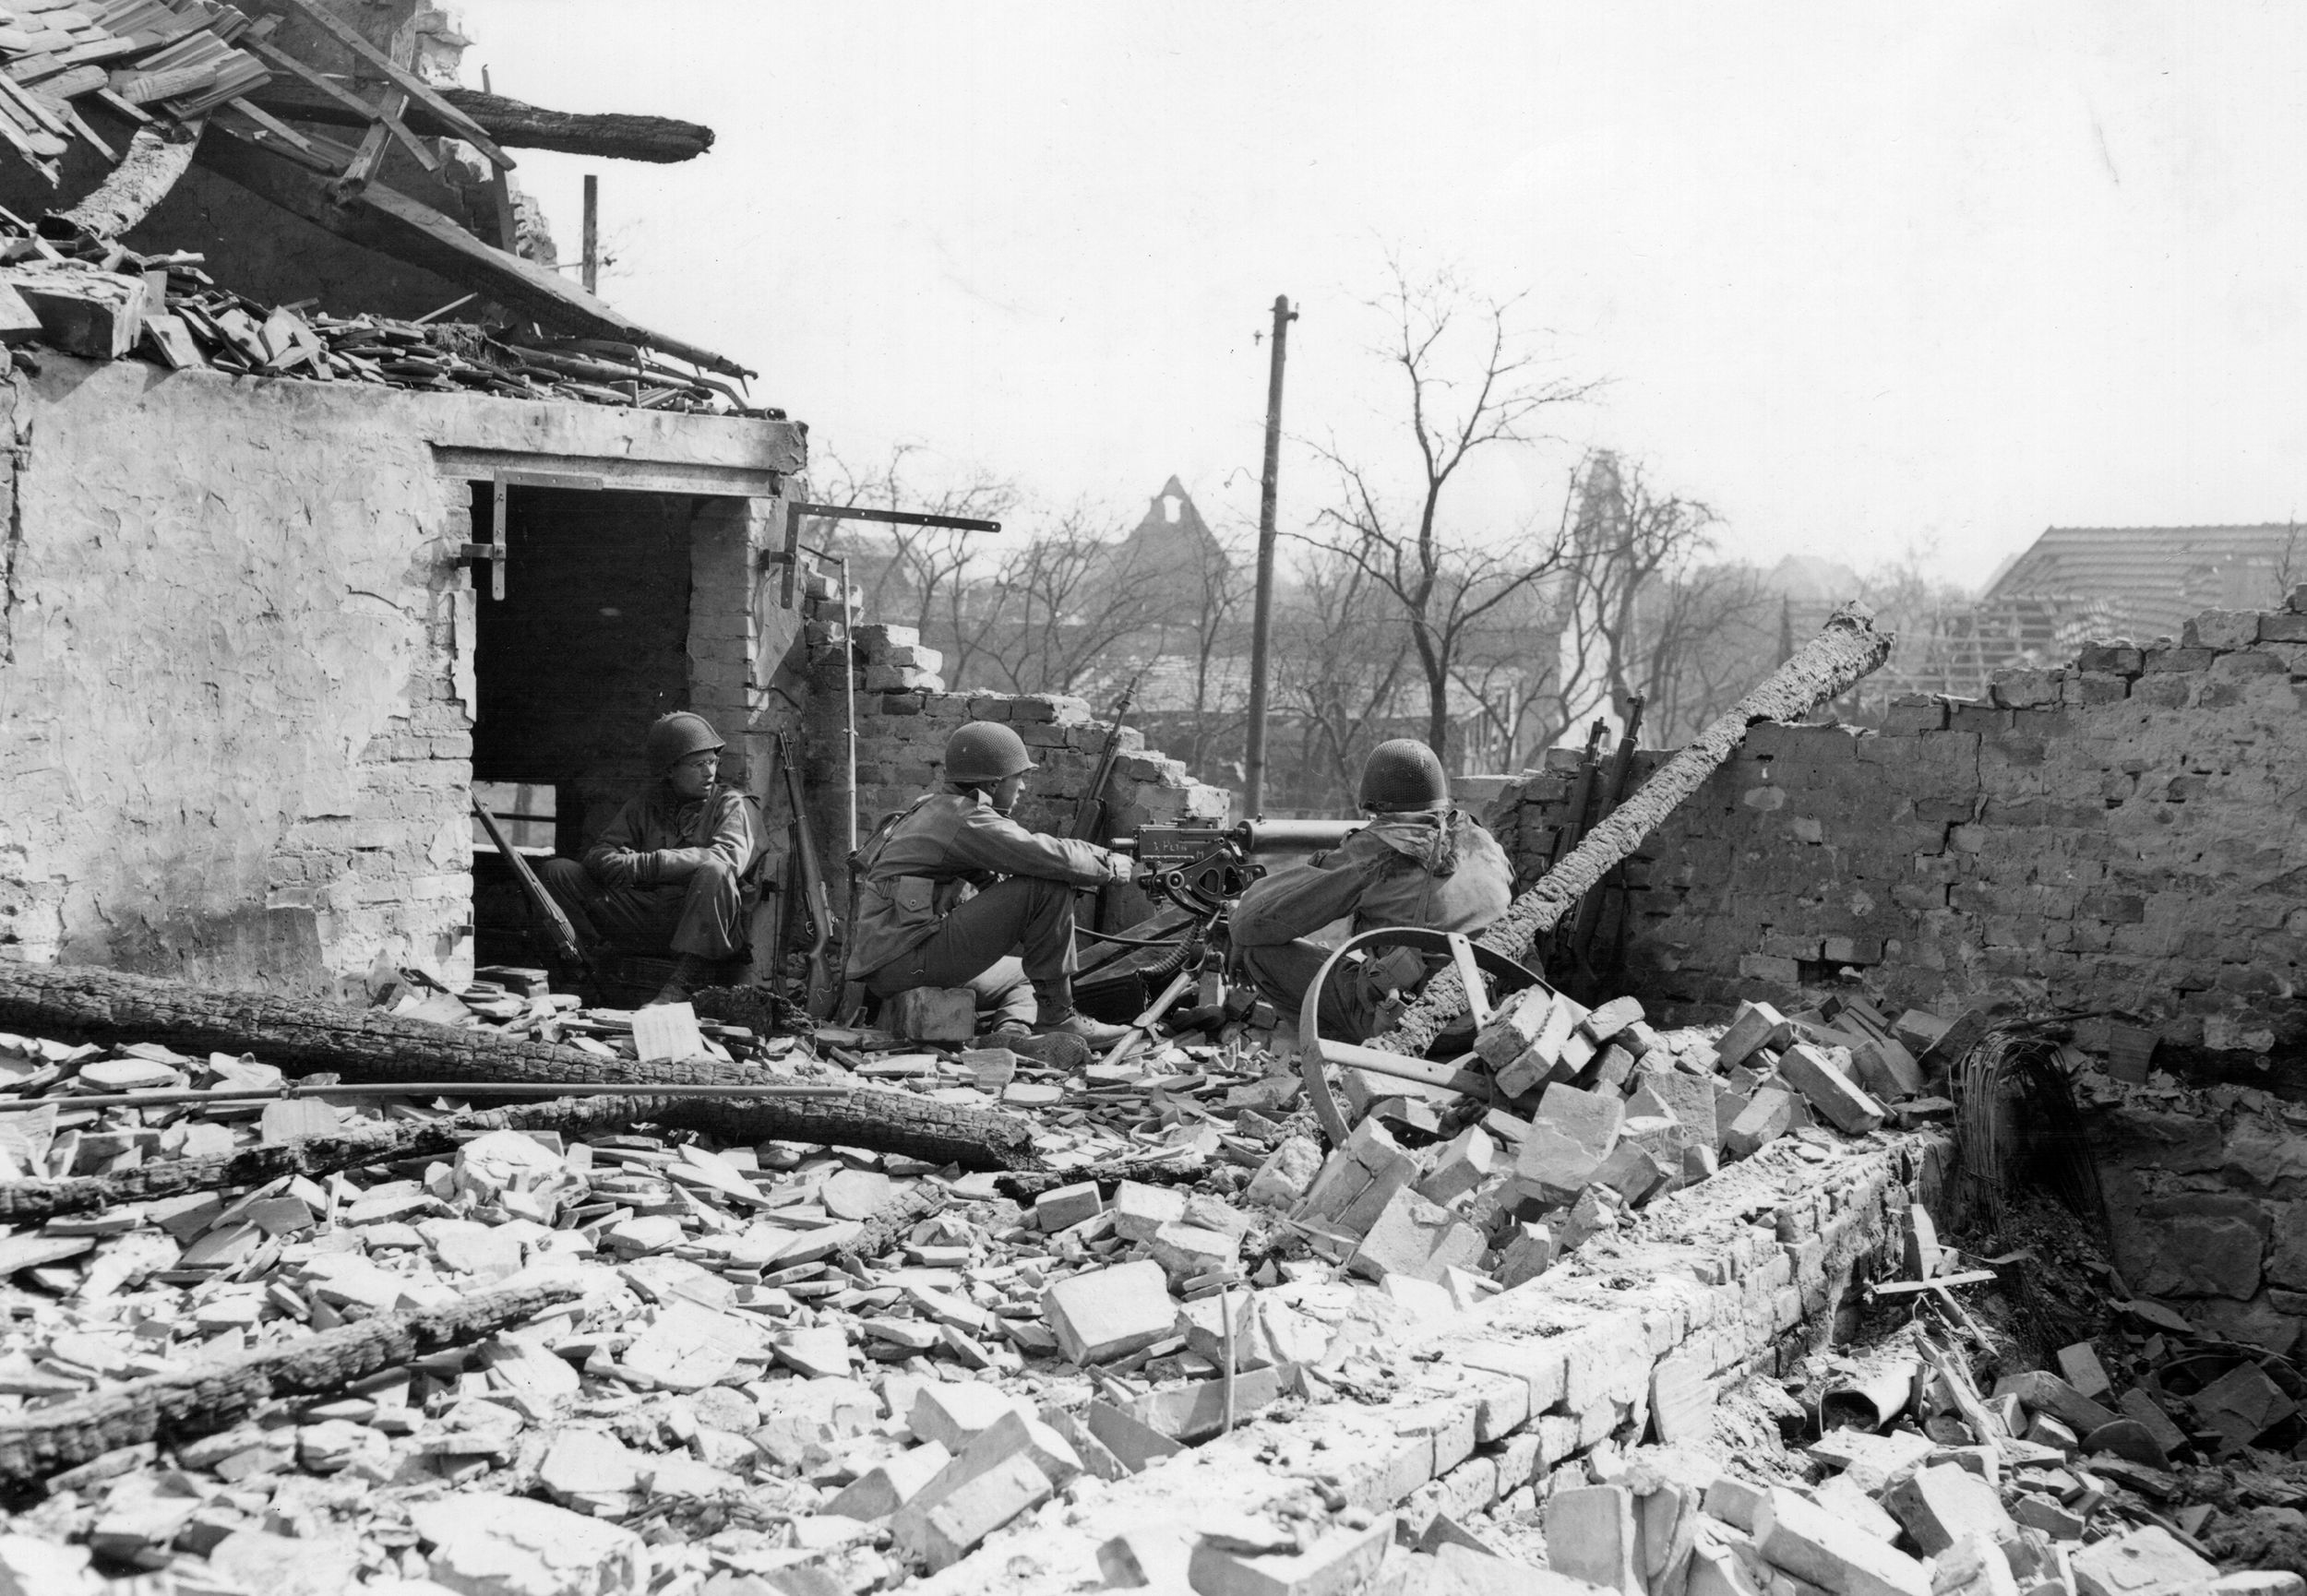 An American machine-gun team sets up a position in the shattered ruins of a building facing the defenses of the Siegfried Line.